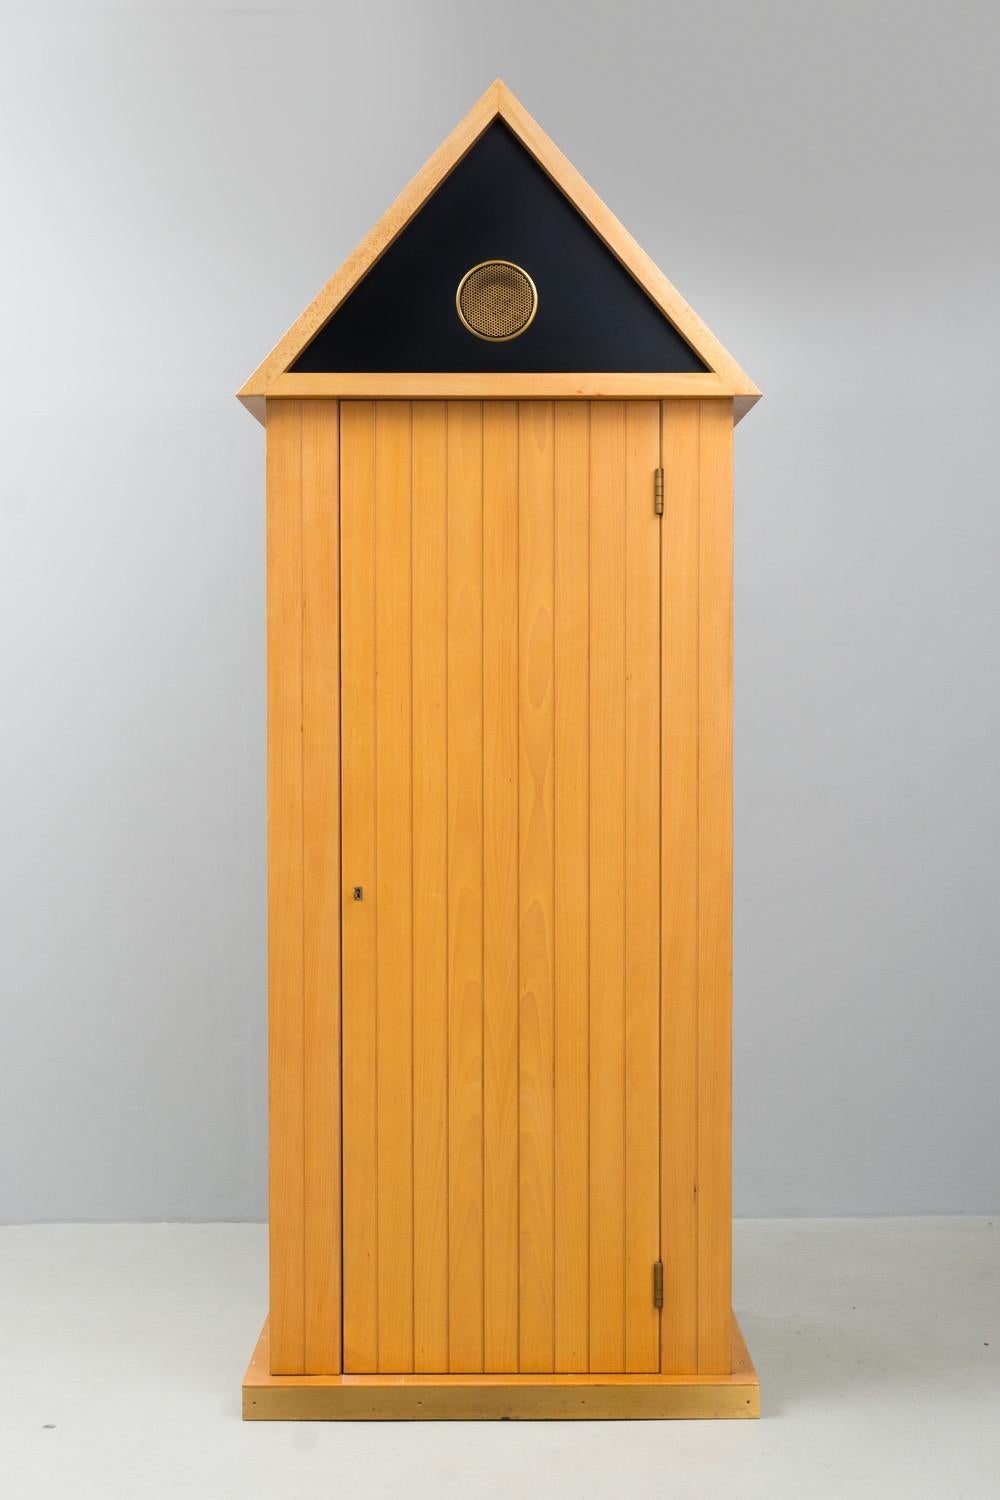 This very rare and eccentric closet is made of solid wood, it has drawers and shelves and a coat rack. The door can be locked with a key. Brass finishing on top and foot. Manufactured in Cantú by Bruno Longoni.

'Aldo Rossi (3 May 1931 – 4